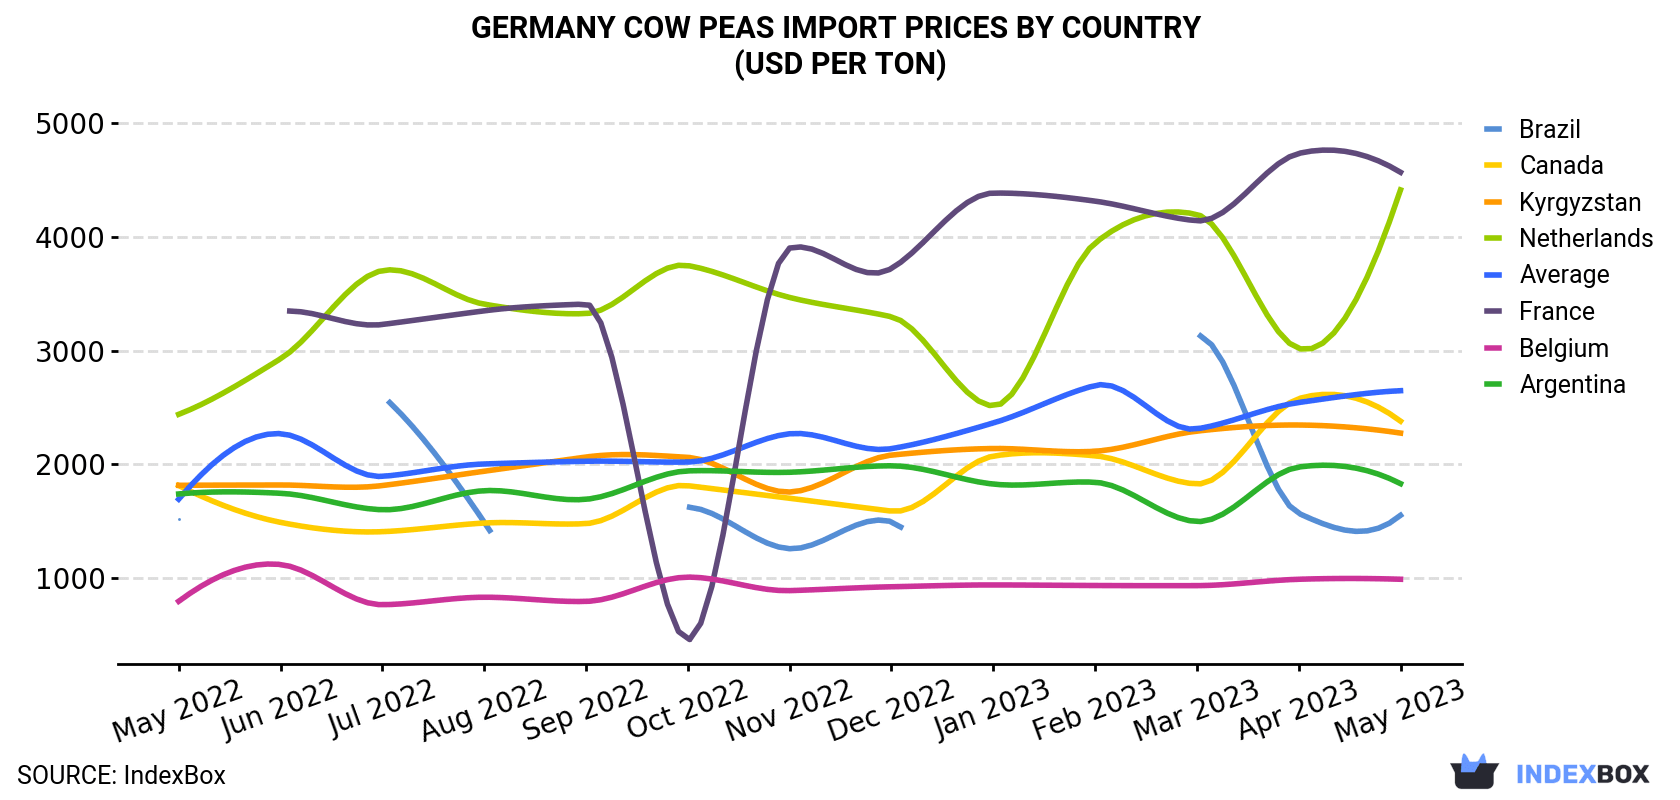 Germany Cow Peas Import Prices By Country (USD Per Ton)